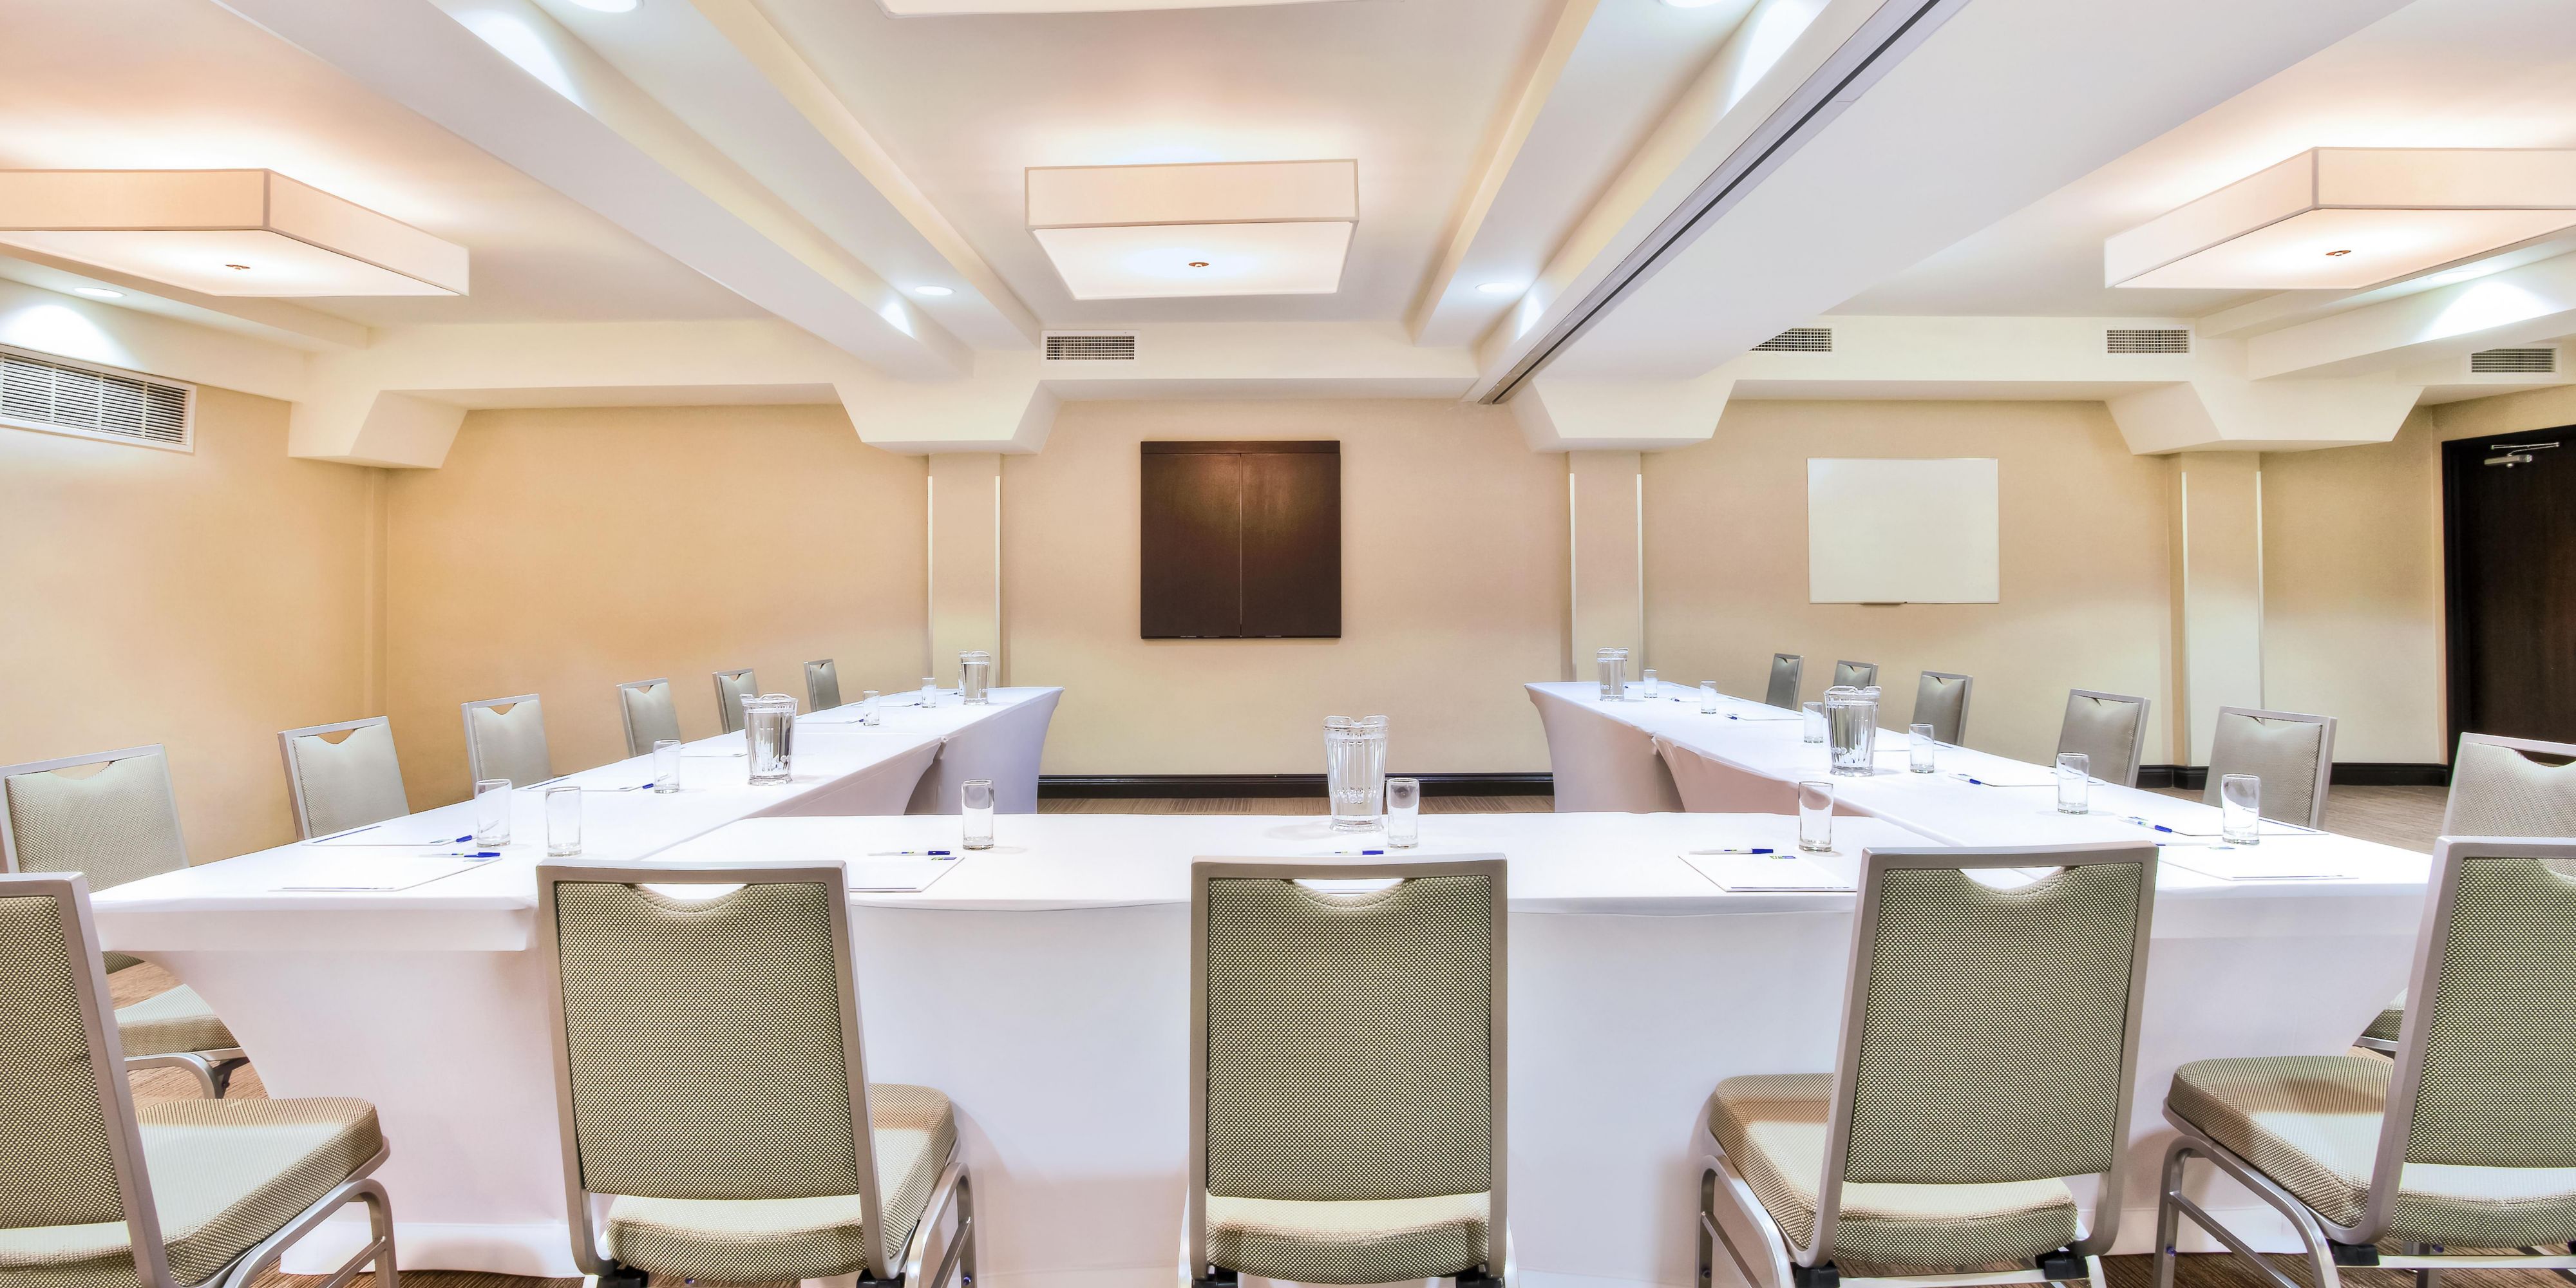 For all of your small or large meeting needs the Empire Room has you covered! Also function as two separate meeting spaces with a divider if the function so desires. 